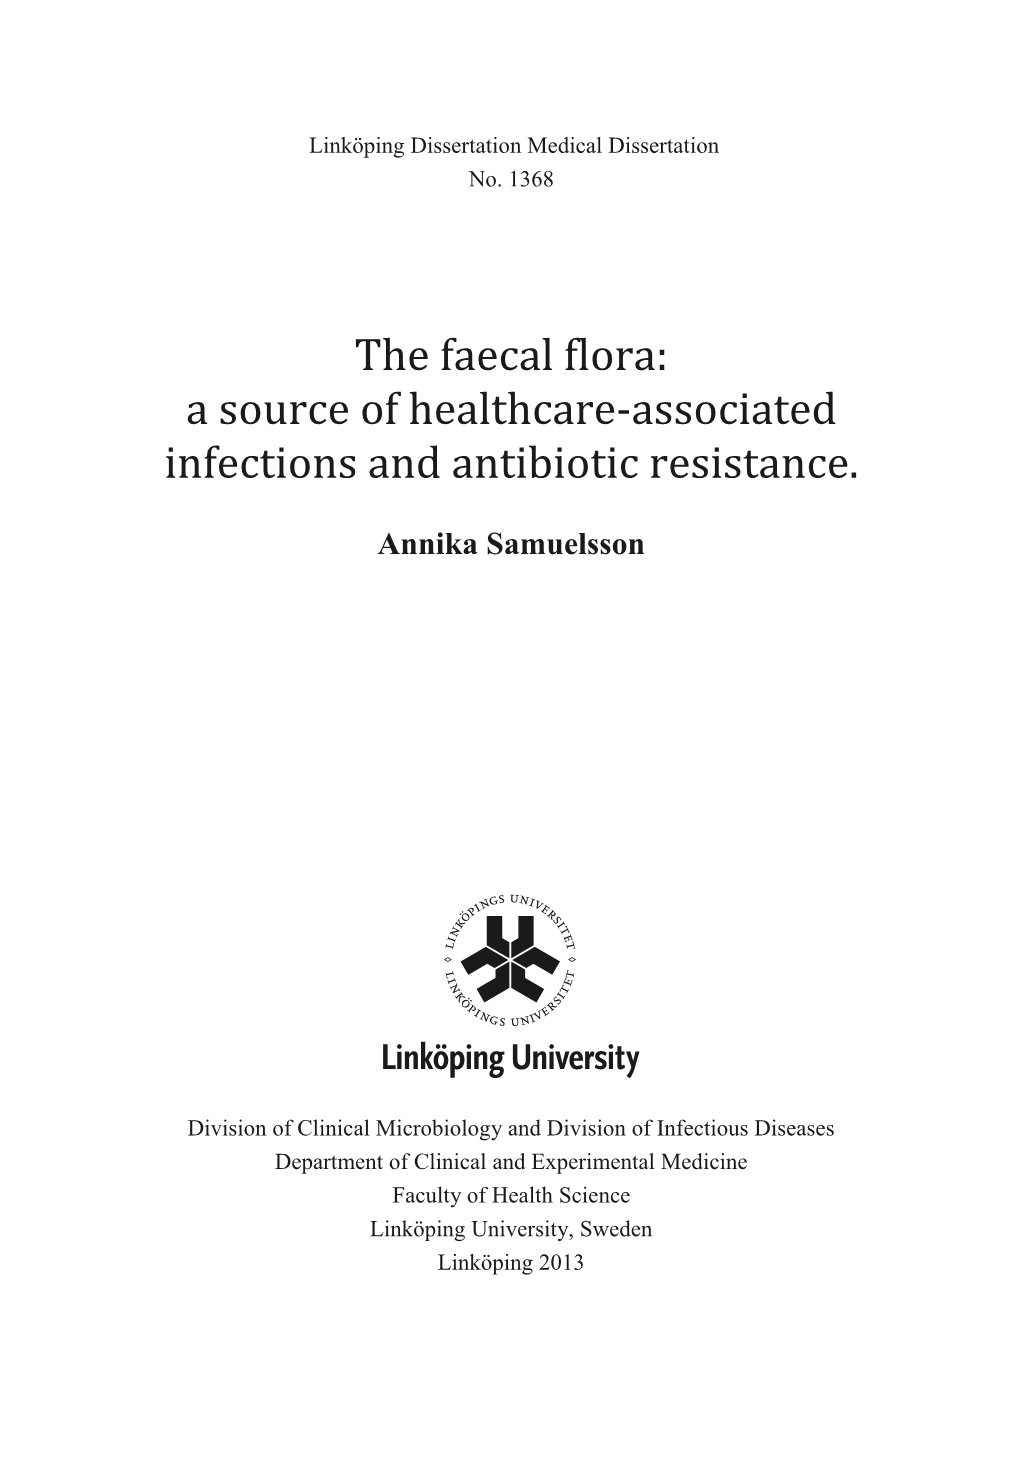 The Faecal Flora: a Source of Healthcare-Associated Infections and Antibiotic Resistance